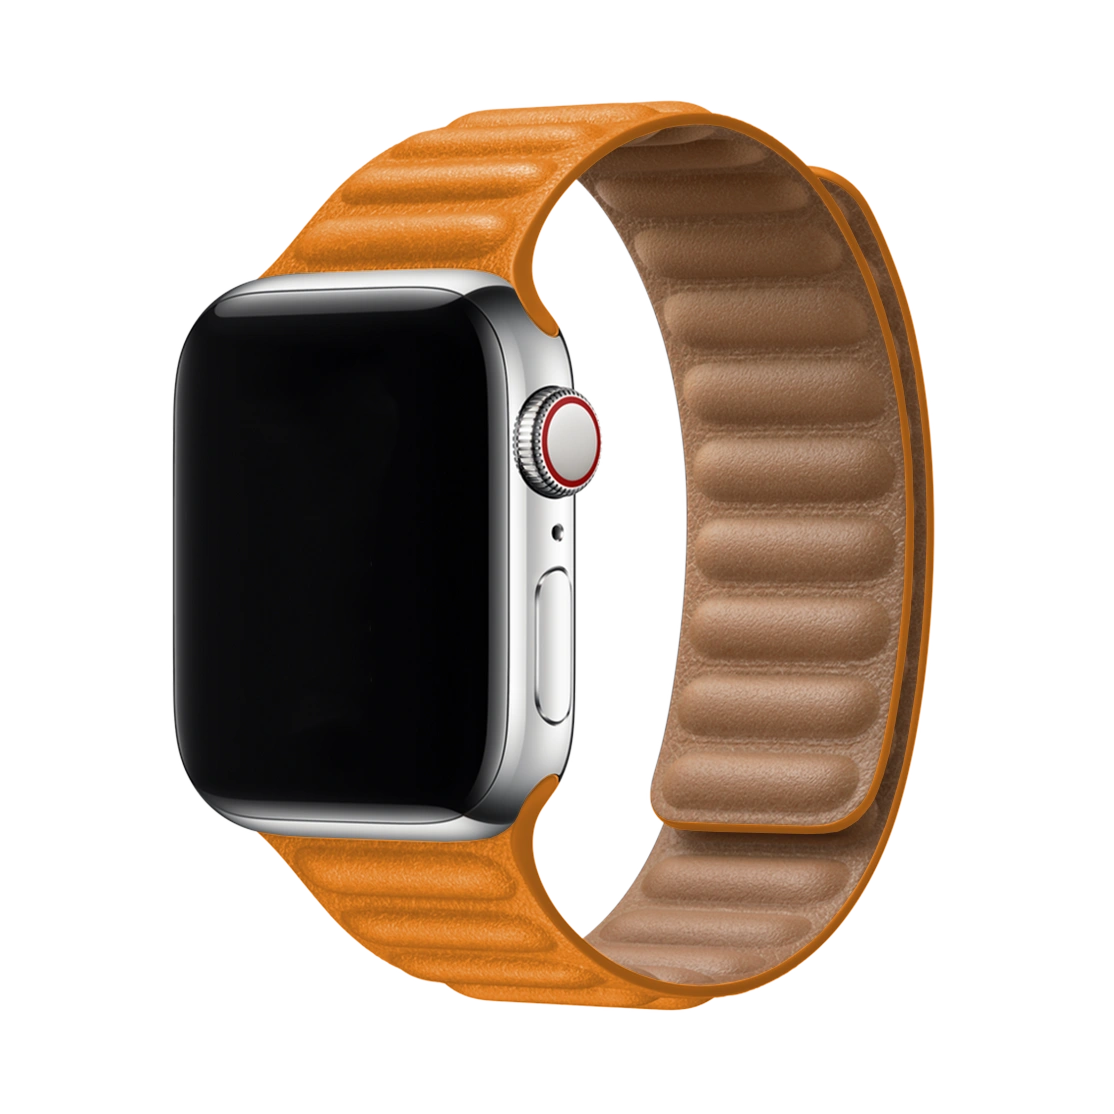 Apple Watch Series 7 Gold Stainless Steel Case with Milanese Loop